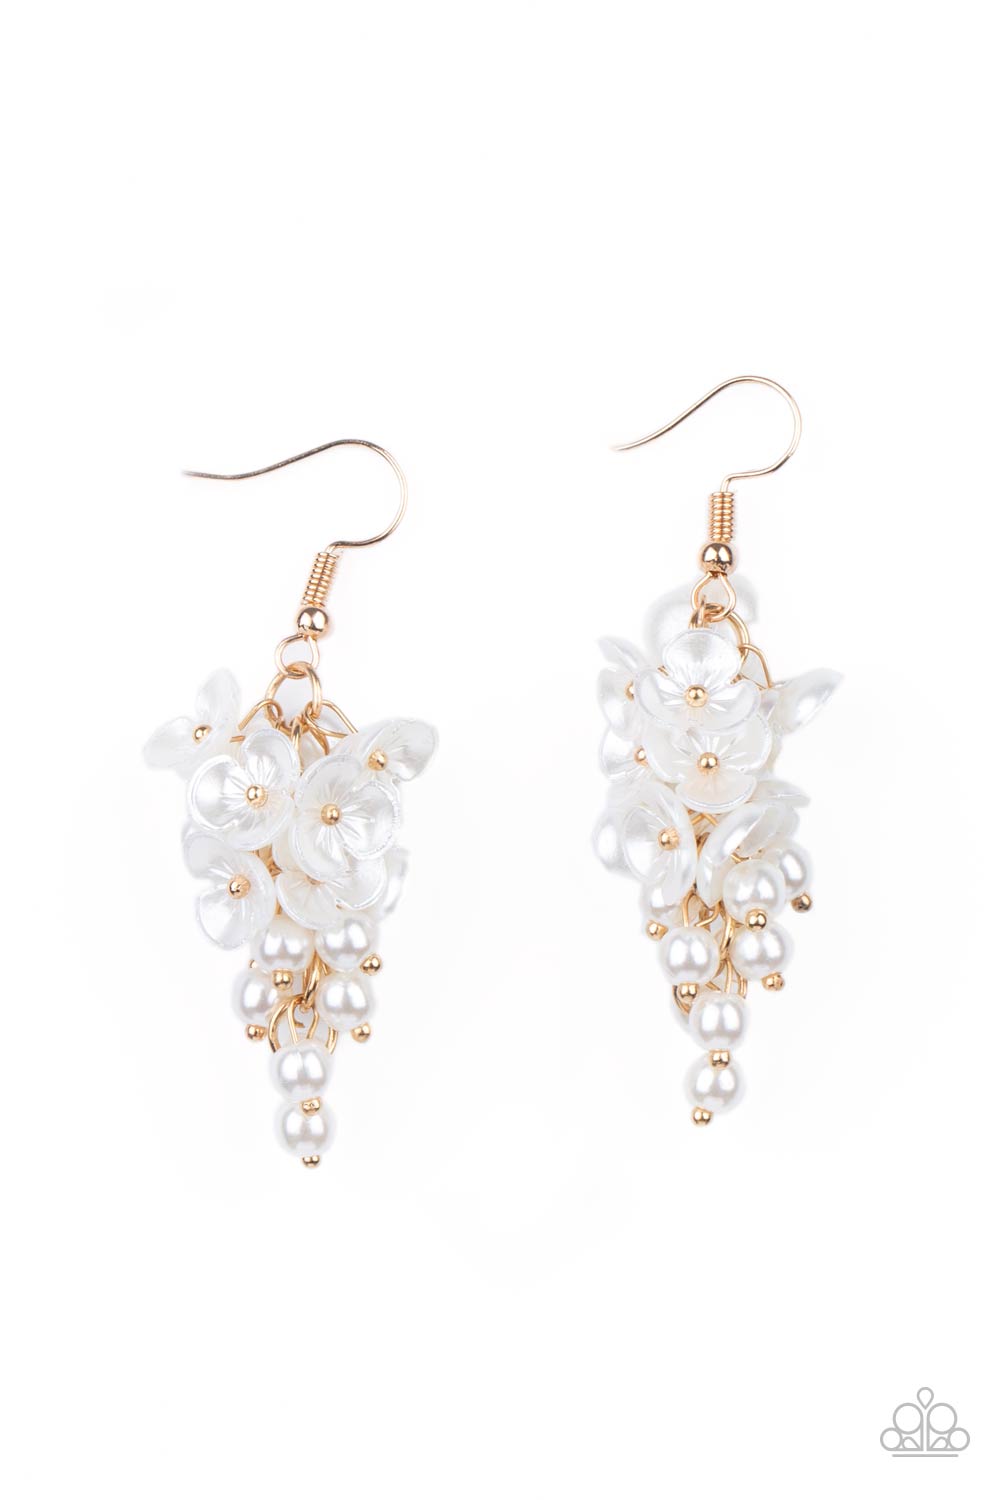 Bountiful Bouquets White Earrings June Life of the Party Exclusive - Princess Glam Shop